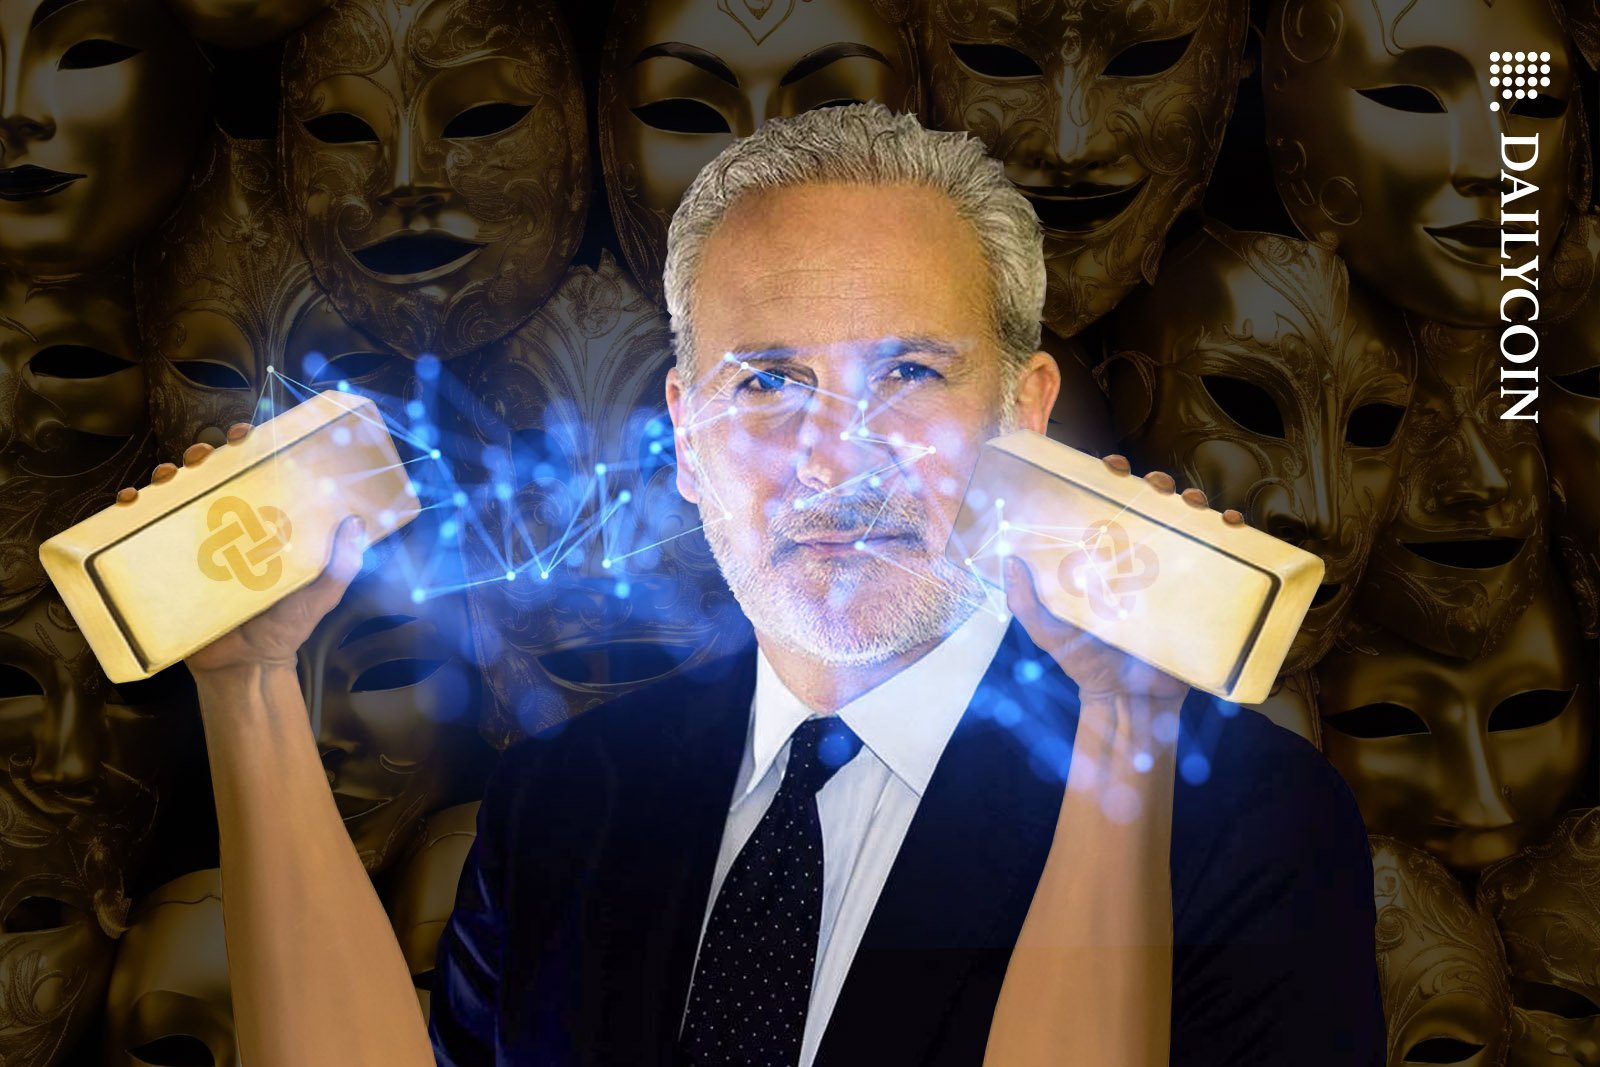 Peter Schiff holding up two gold bars in front of a wall of golden masks.